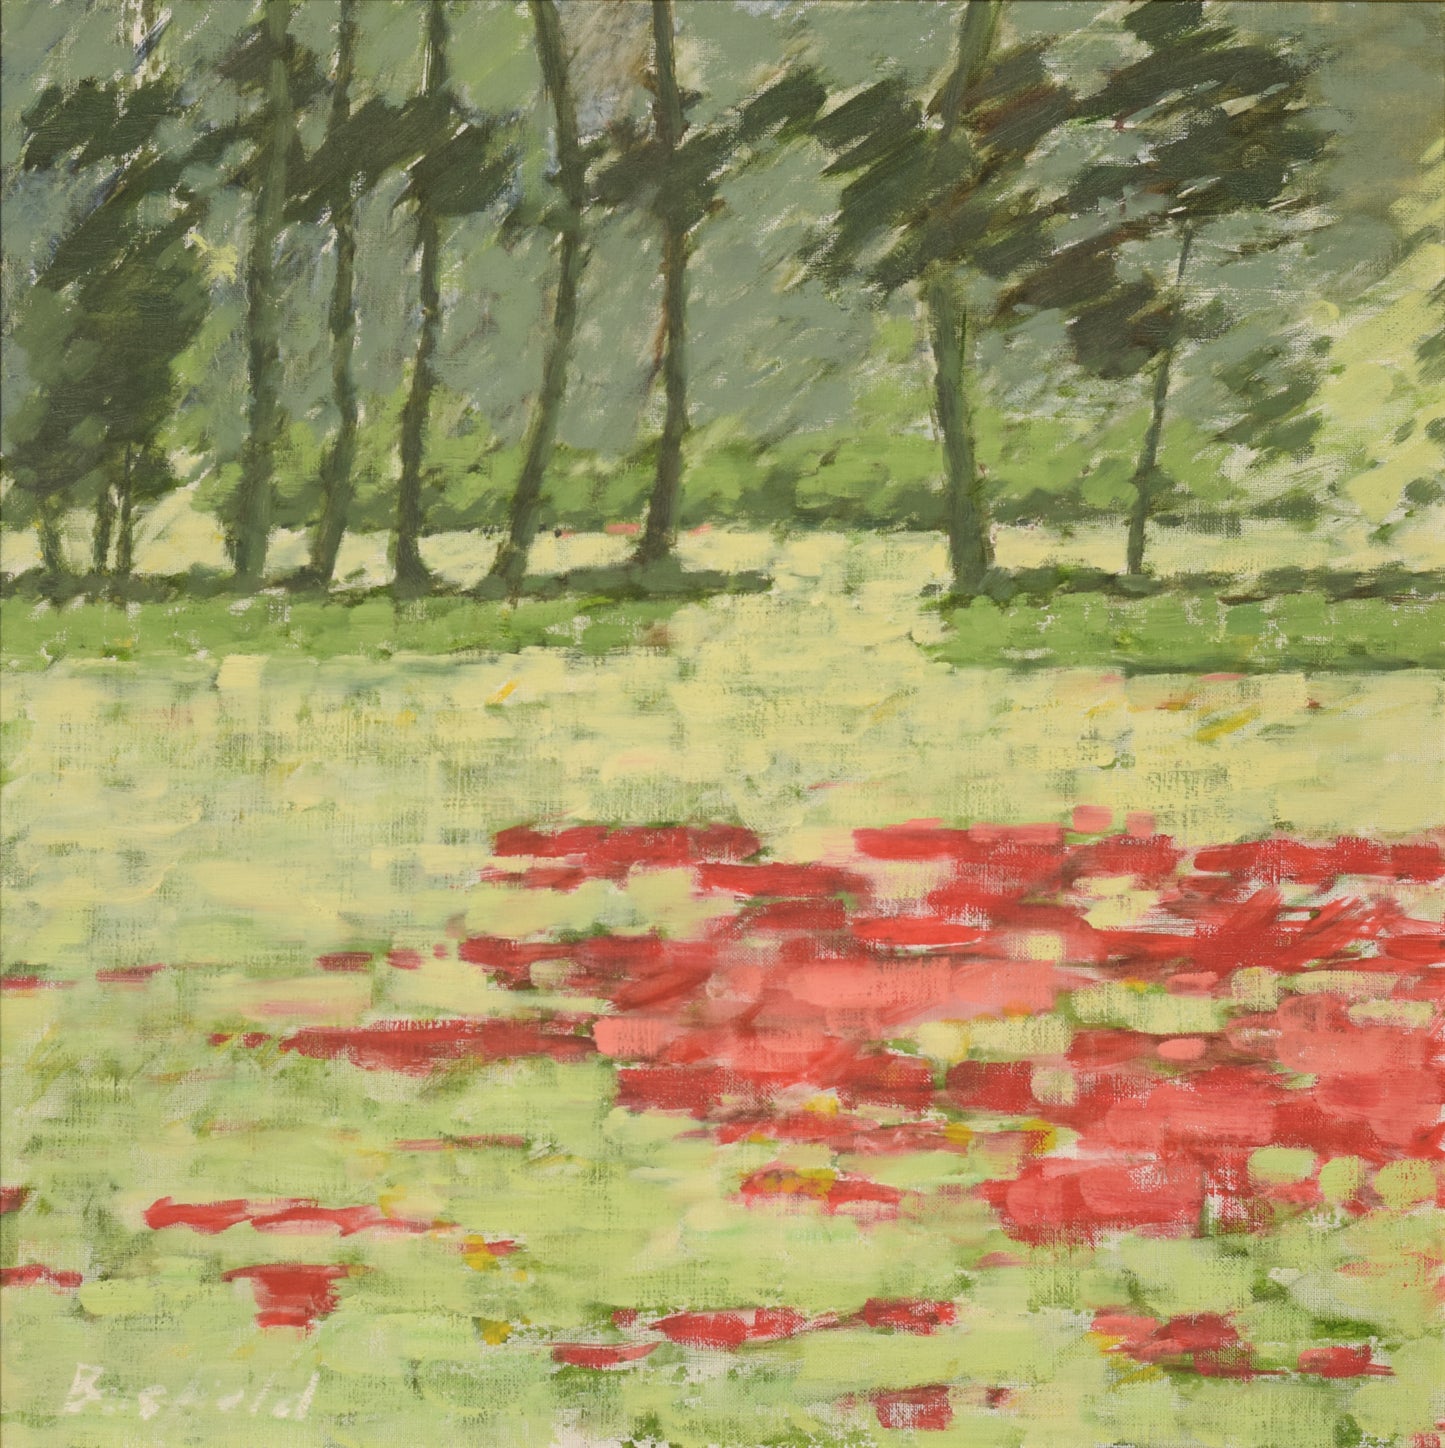 Field with Red Flowers Oil on Canvas by Brian Busfield